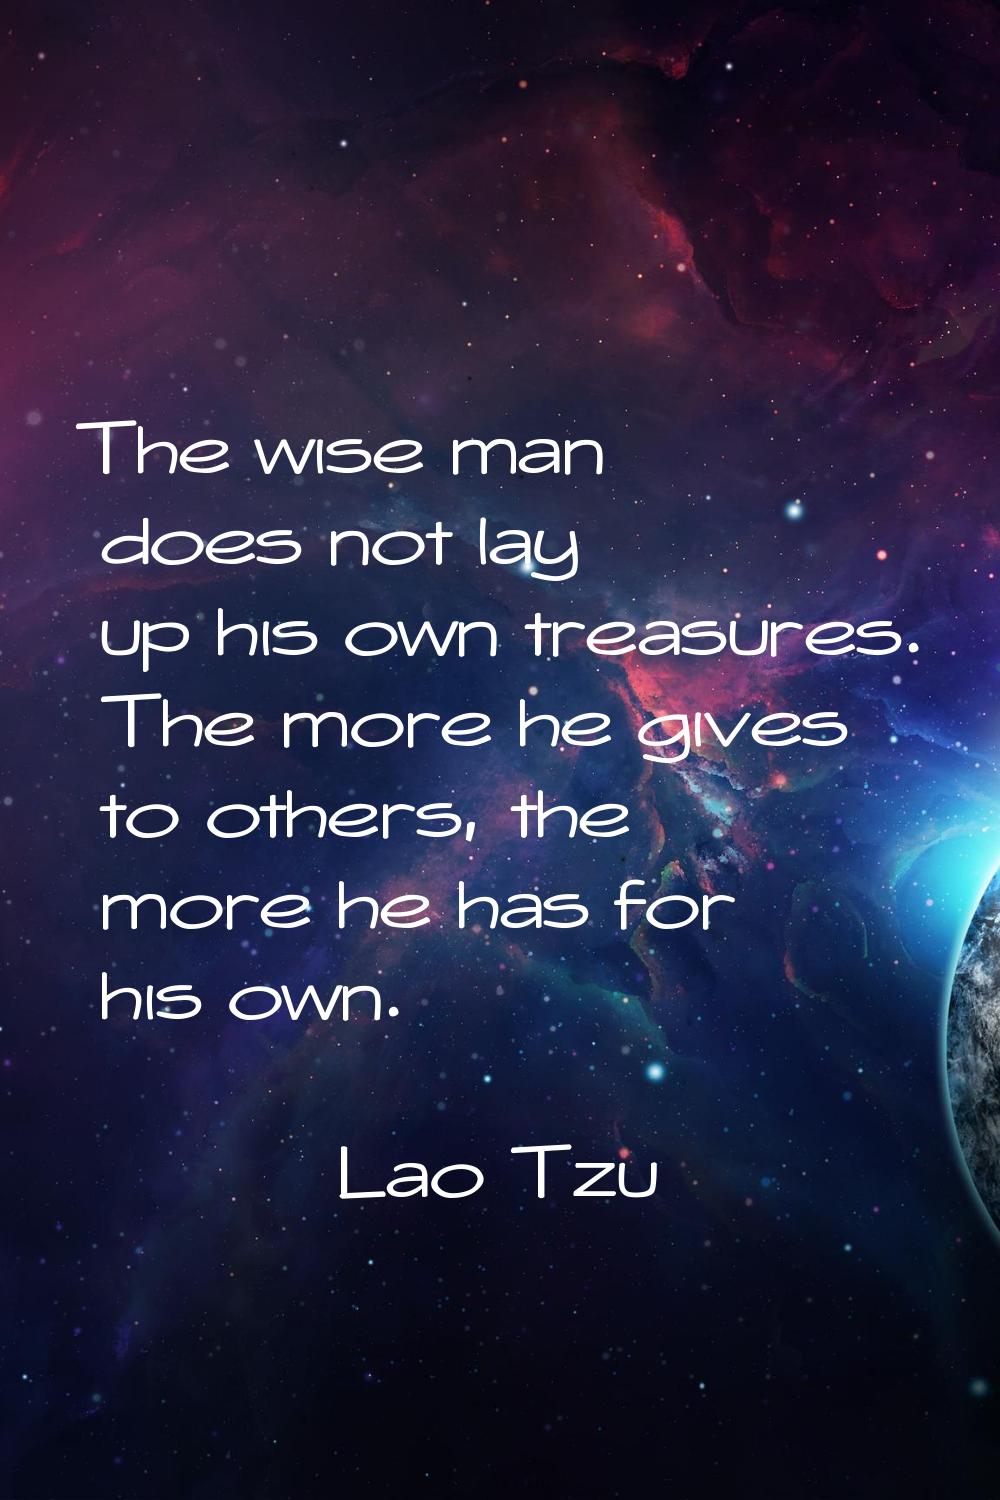 The wise man does not lay up his own treasures. The more he gives to others, the more he has for hi